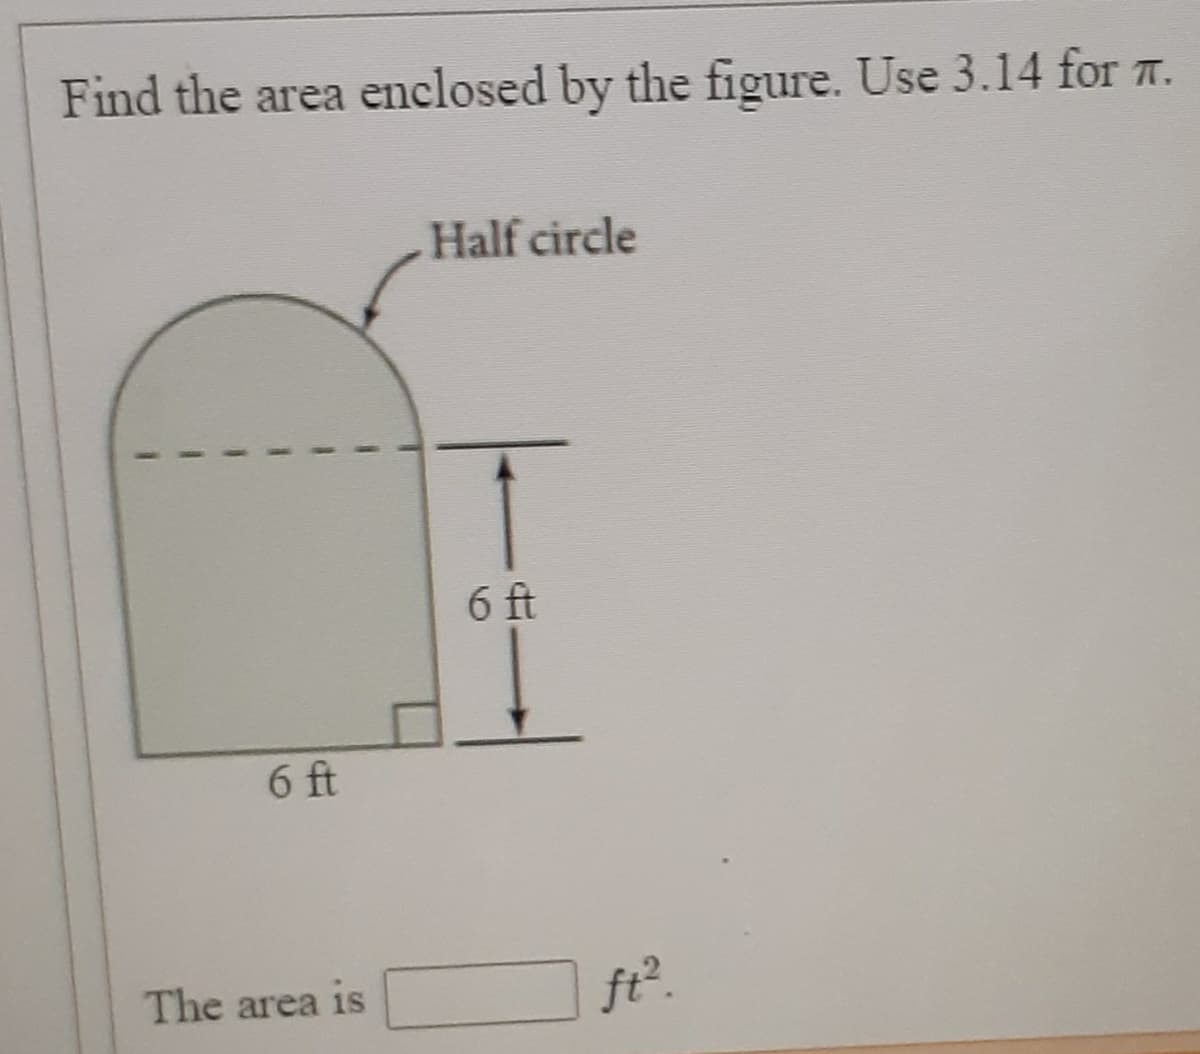 Find the area enclosed by the figure. Use 3.14 for 7.
Half circle
6 ft
6 ft
The area is
ft2.
